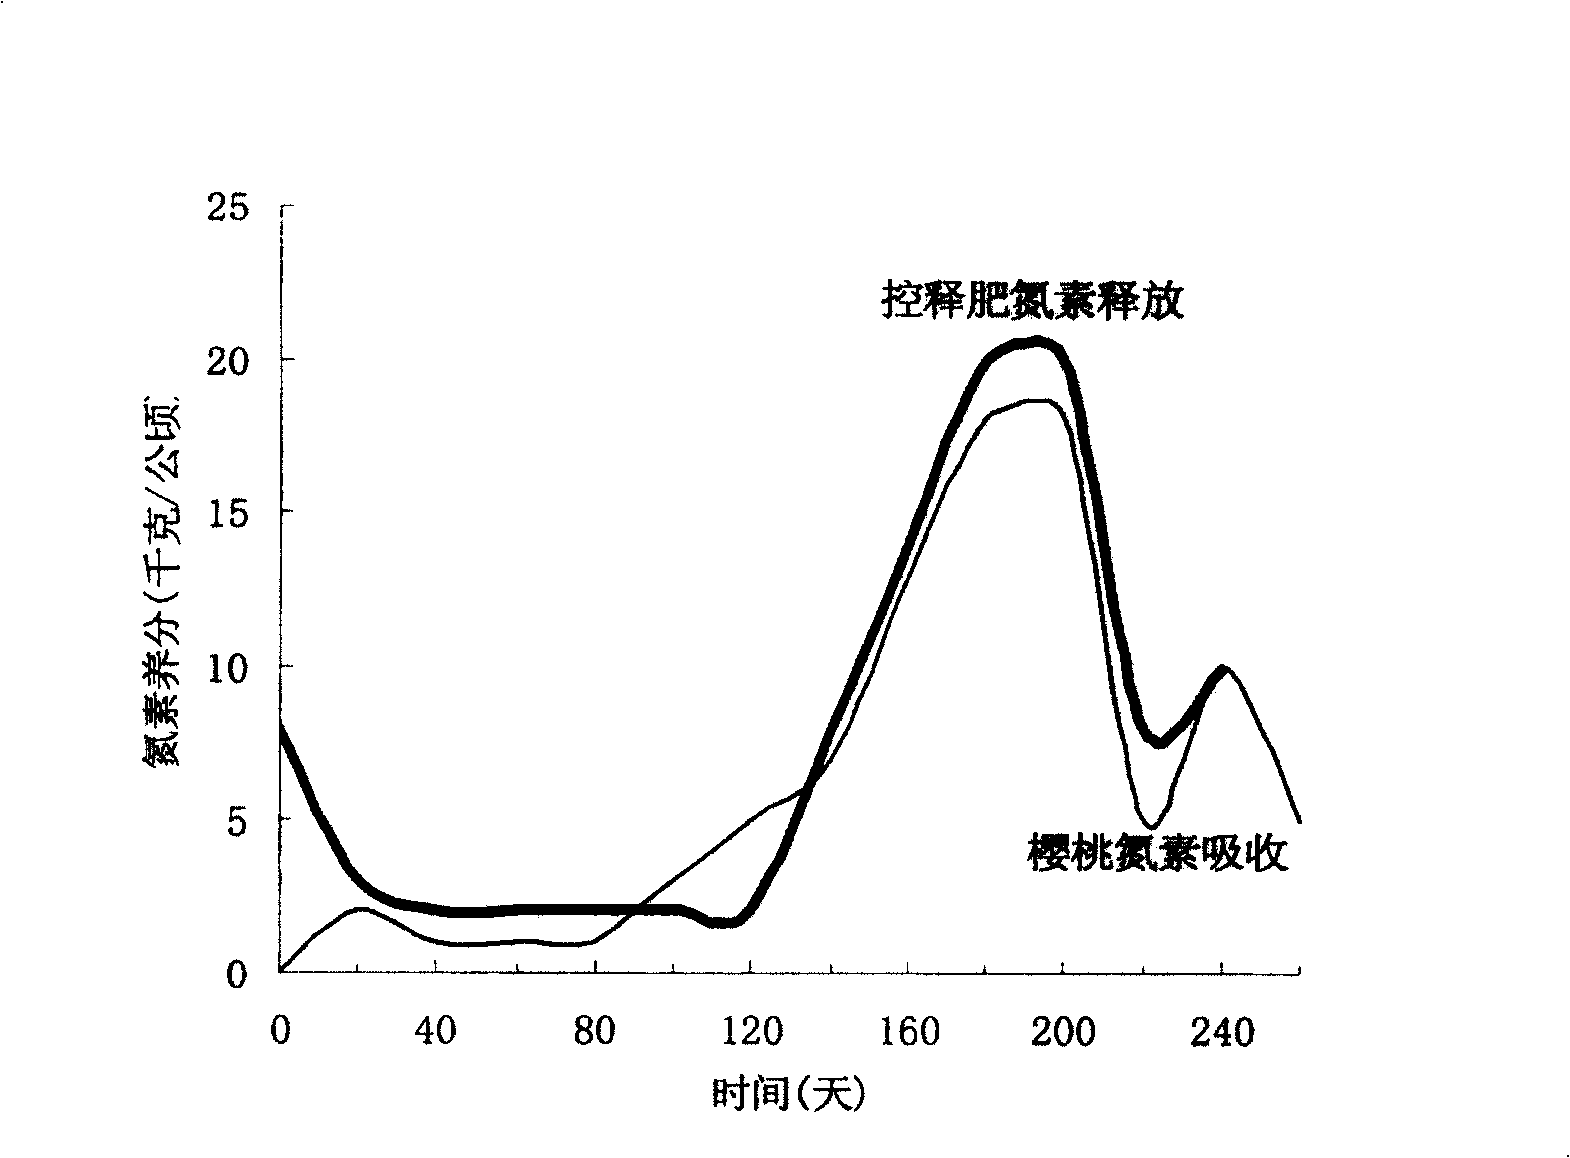 Special controlled-release fertilizer for resin film coated cherry and preparation method thereof